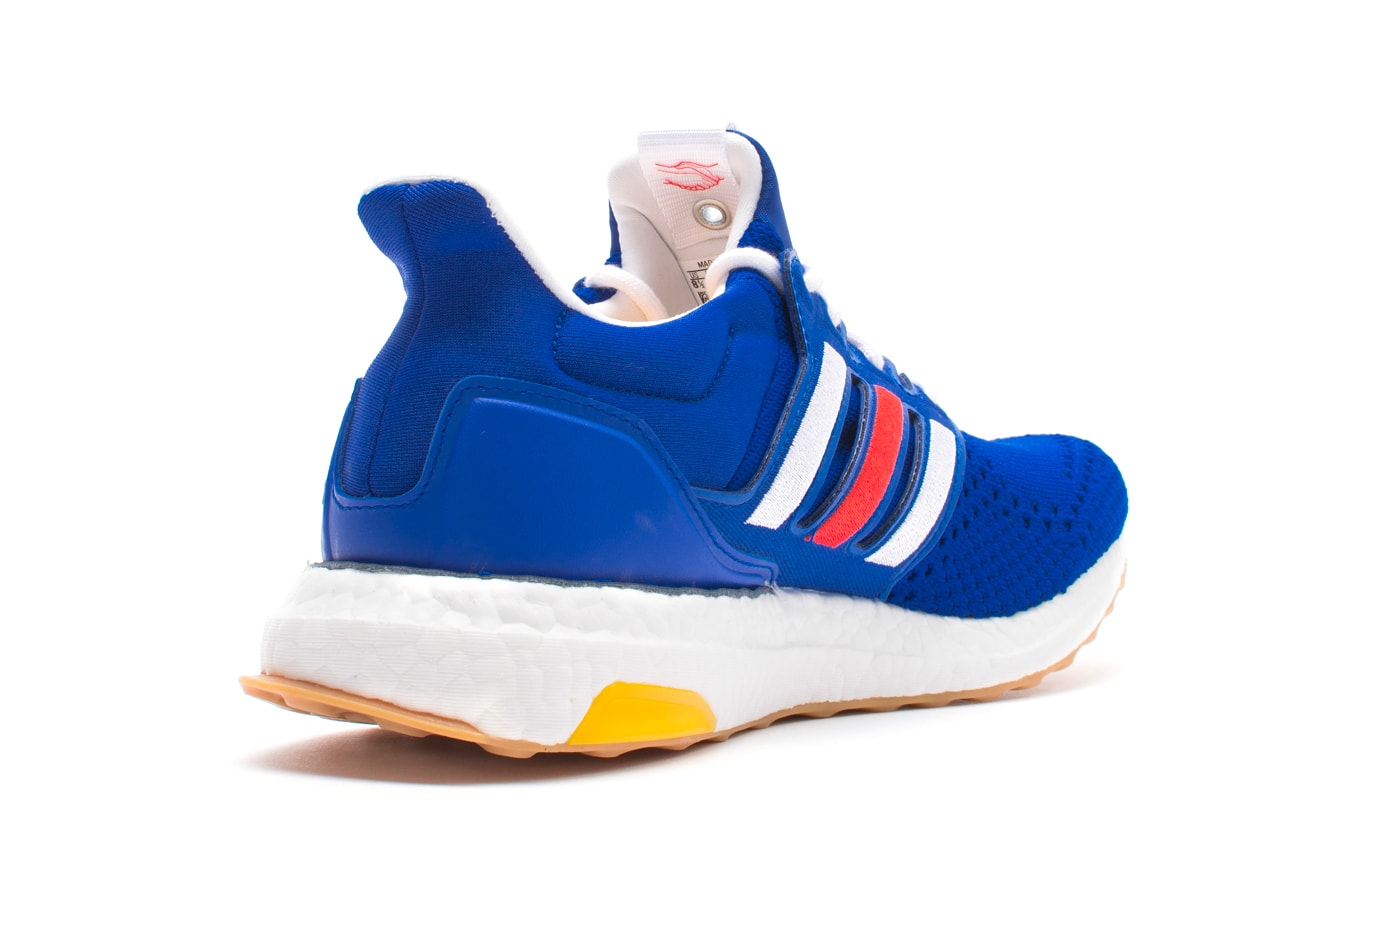 Engineered Garments x adidas UltraBOOST Release date info price consortium sneaker colorway blue red white gum sole purchase online